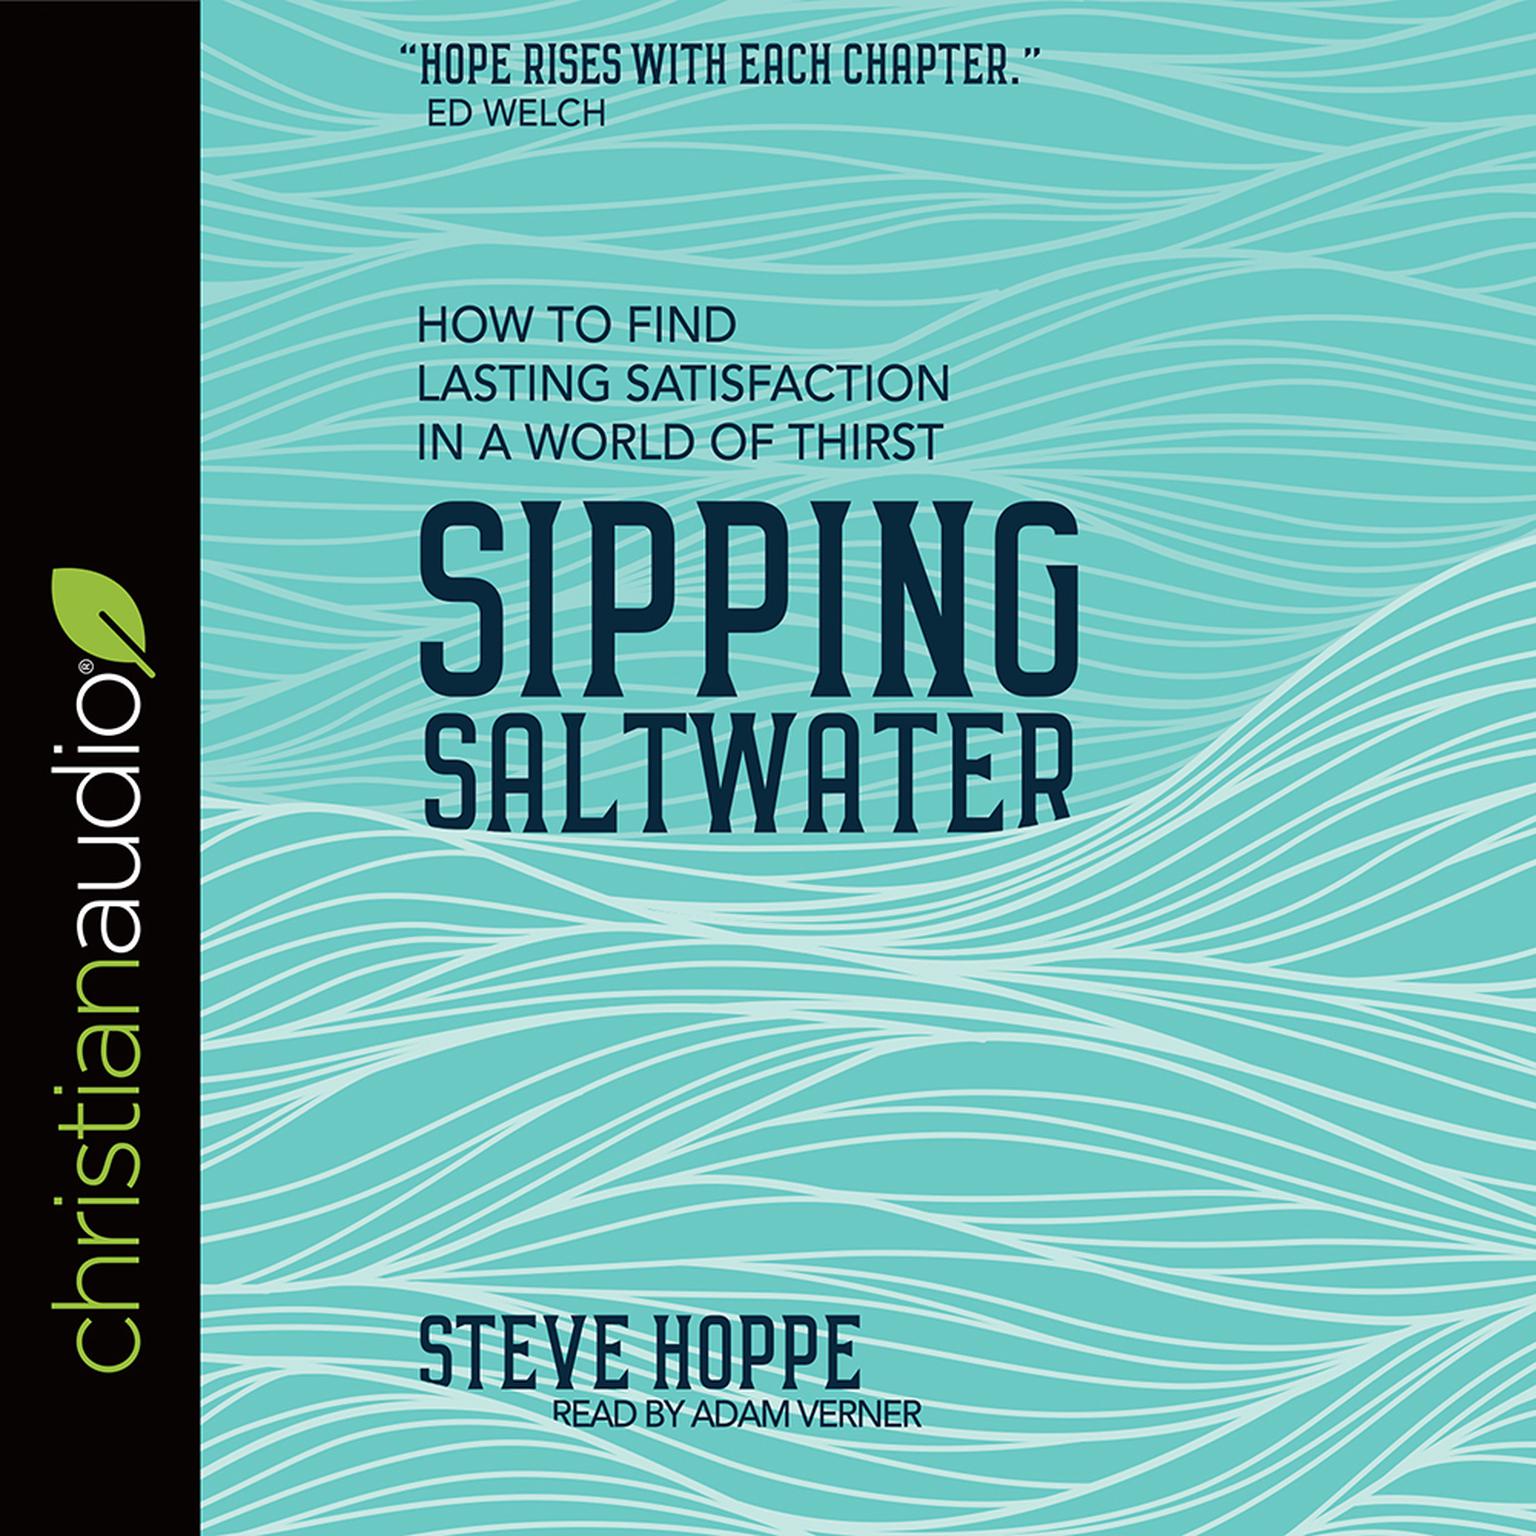 Sipping Saltwater: How to find lasting satisfaction in a world of thirst Audiobook, by Steve Hoppe